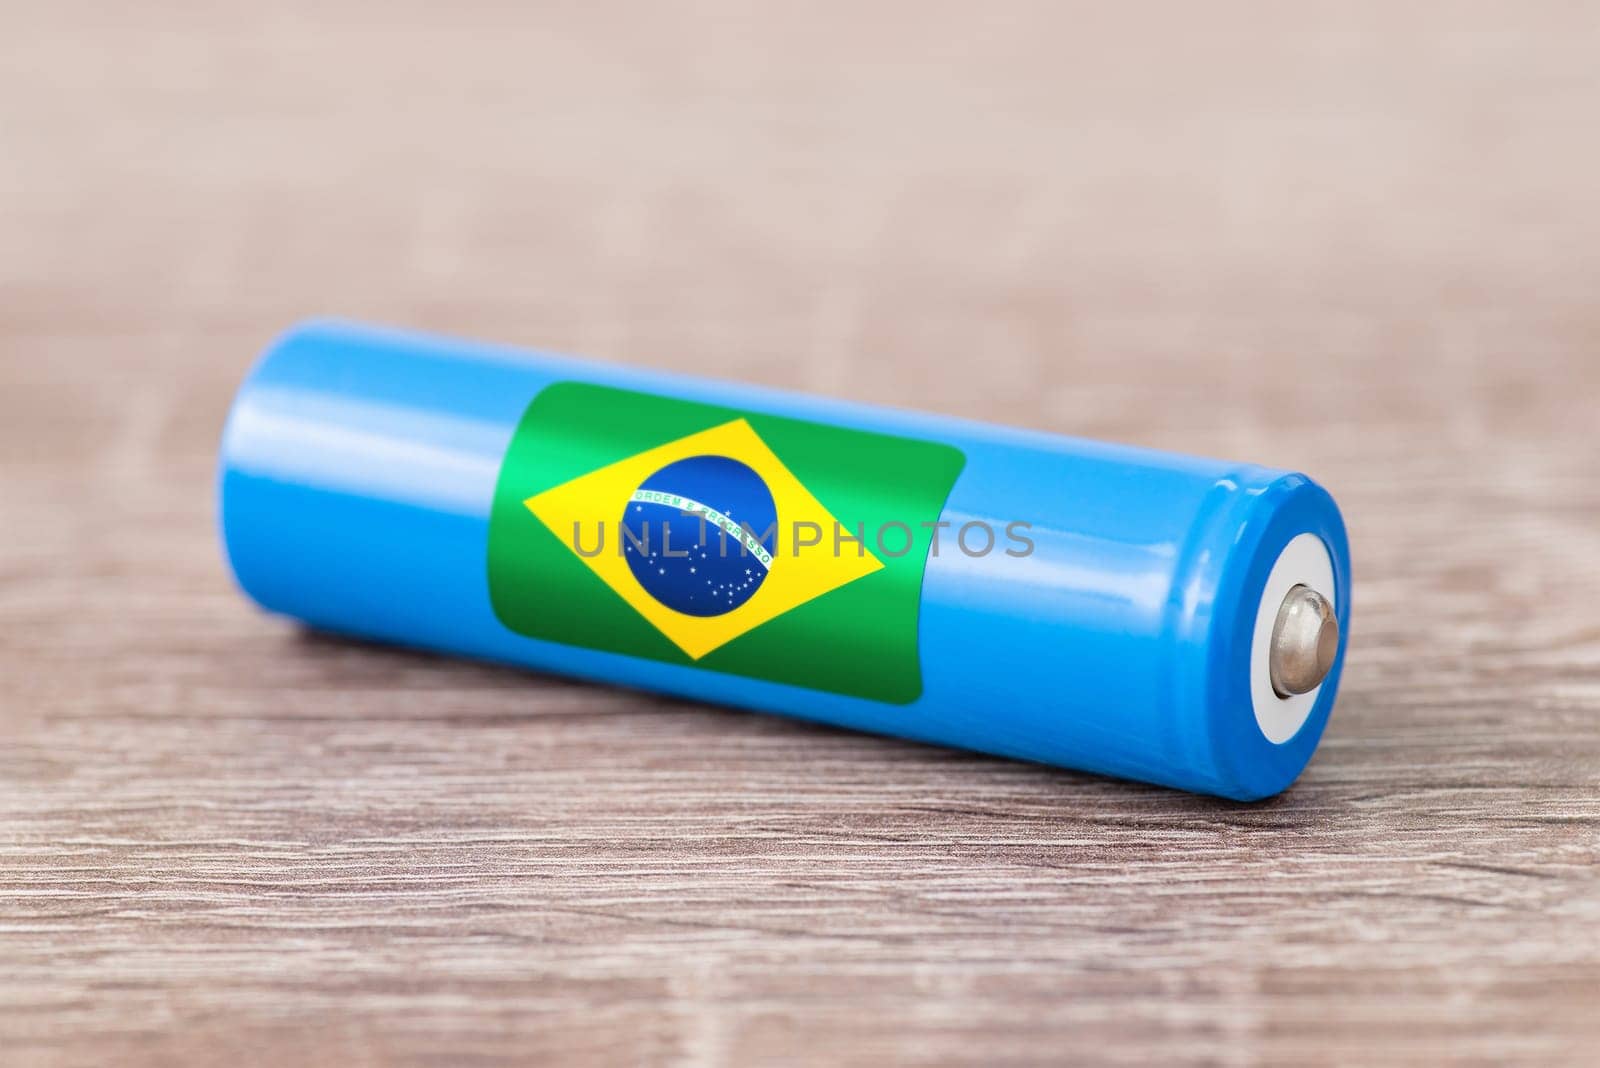 Production of lithium batteries in Brazil